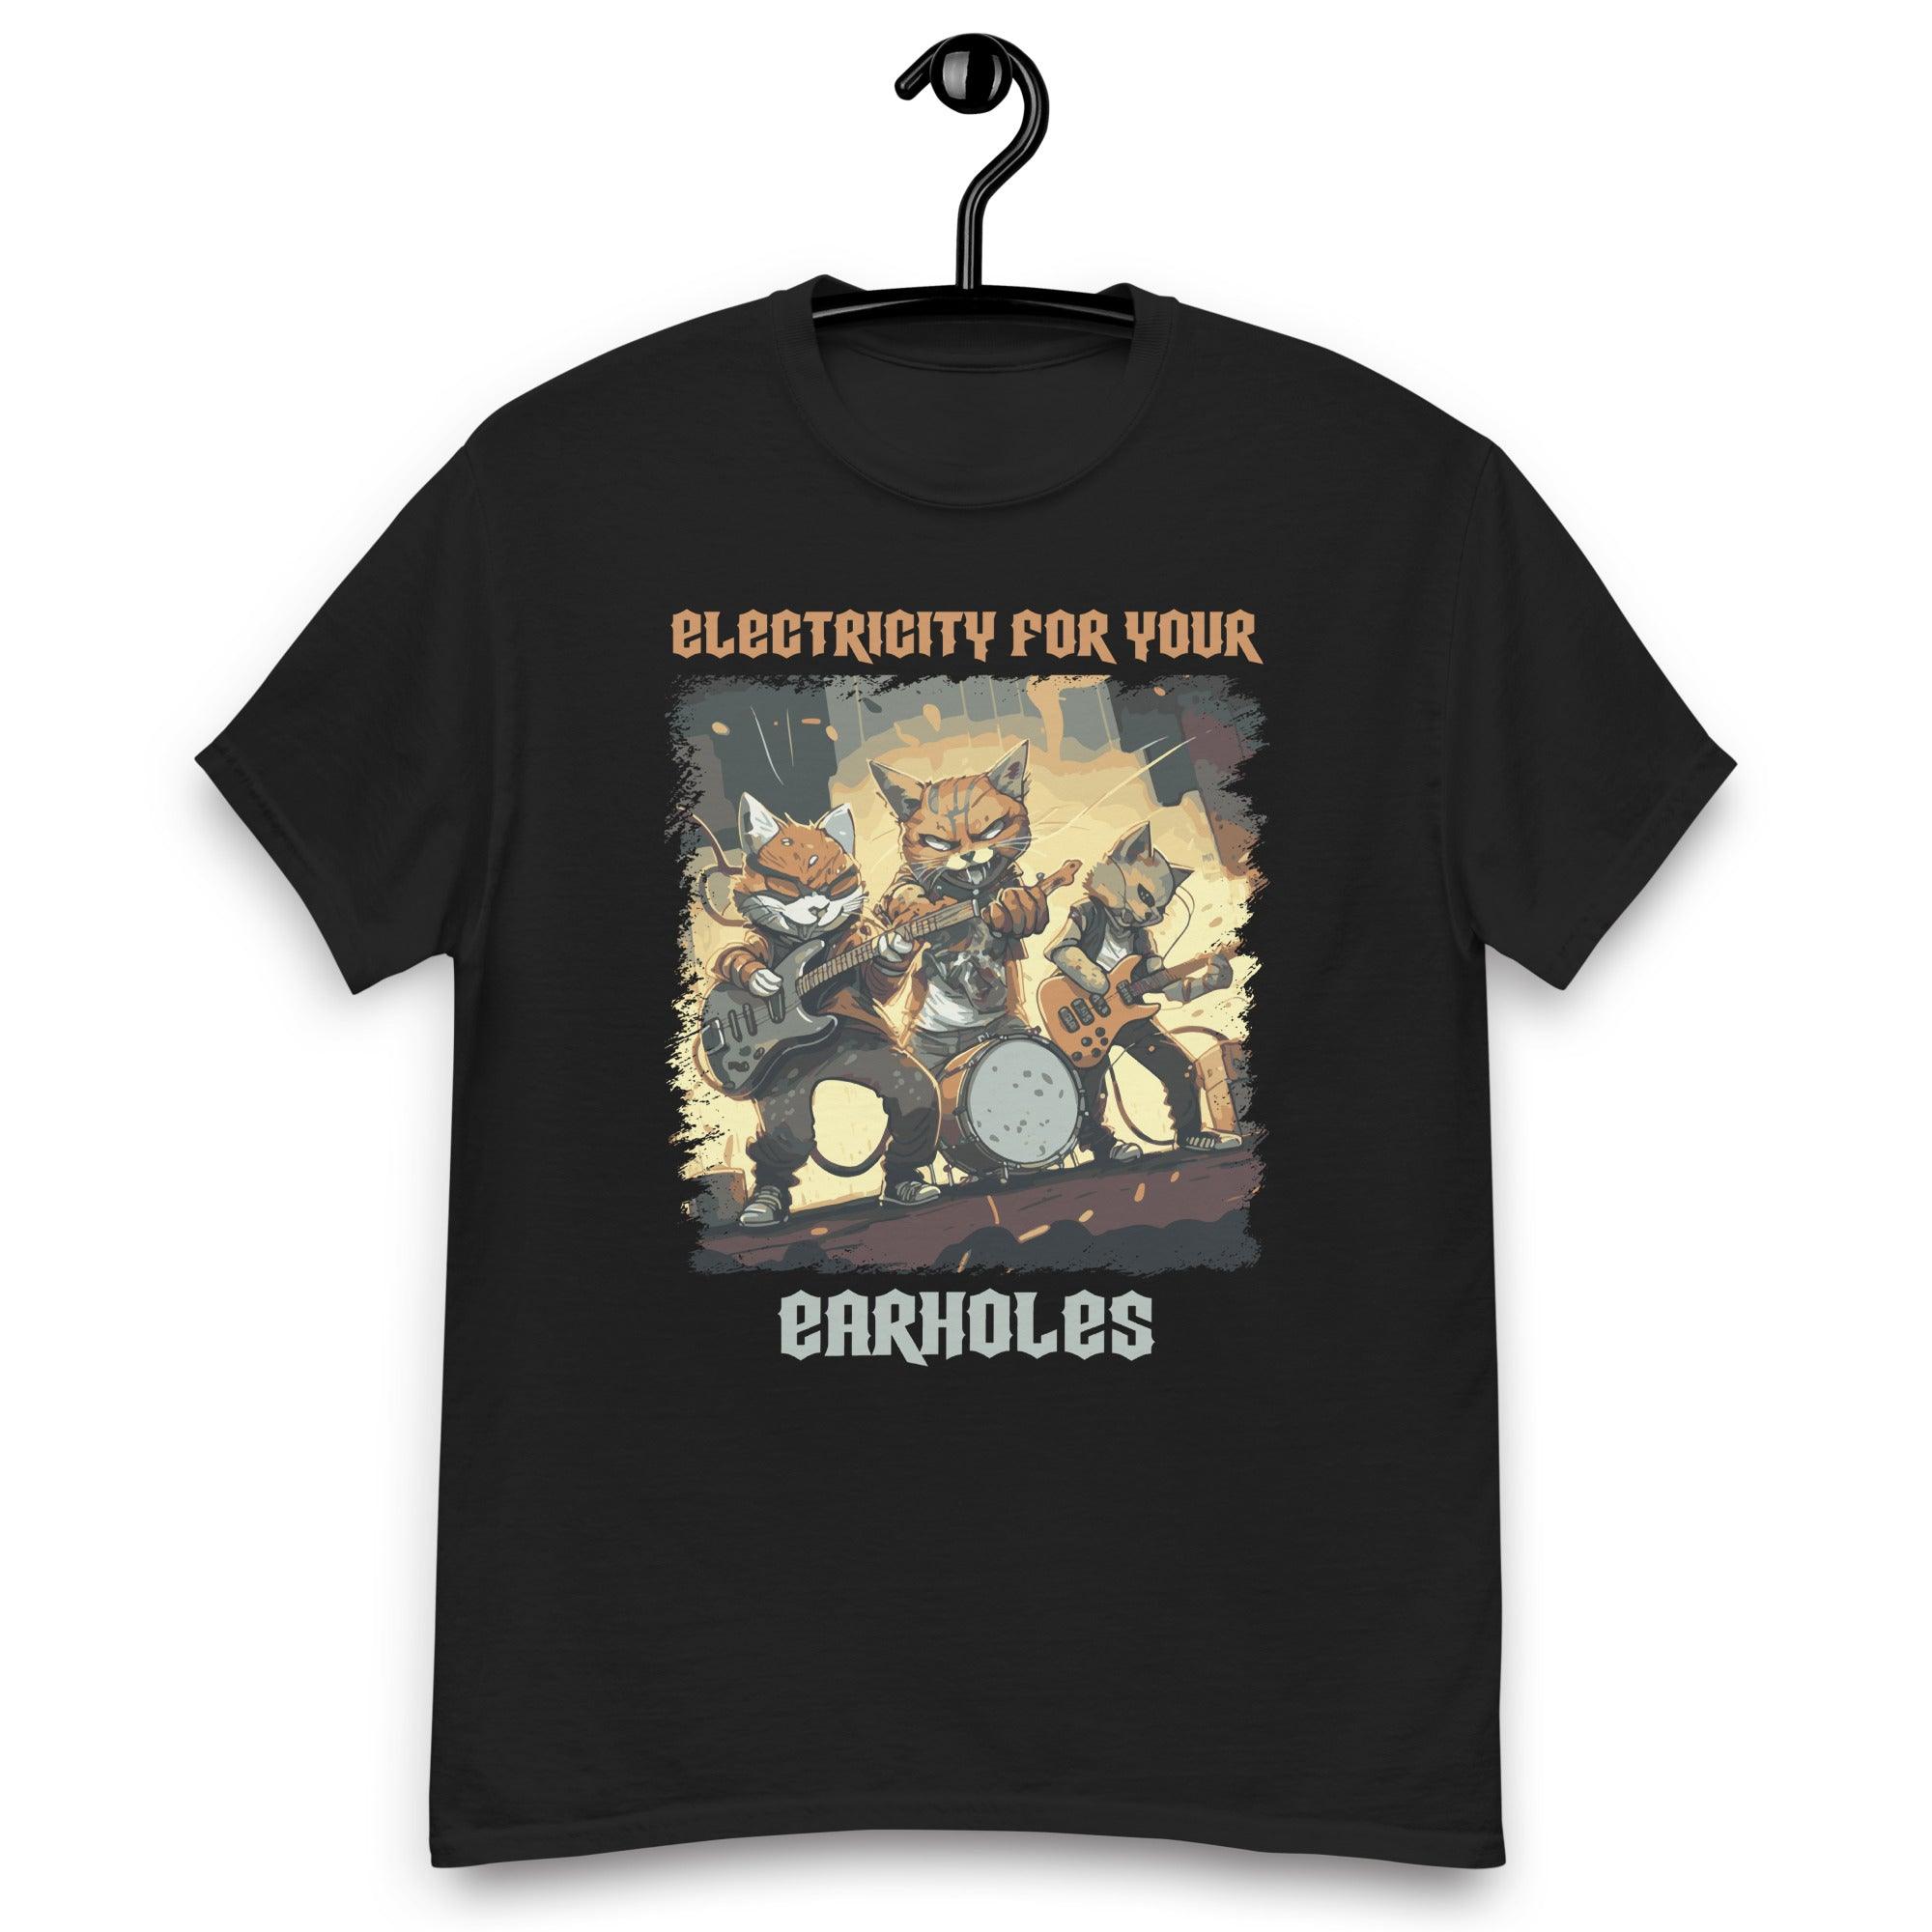 Electricity For Your Earholes Men's classic tee - Beyond T-shirts